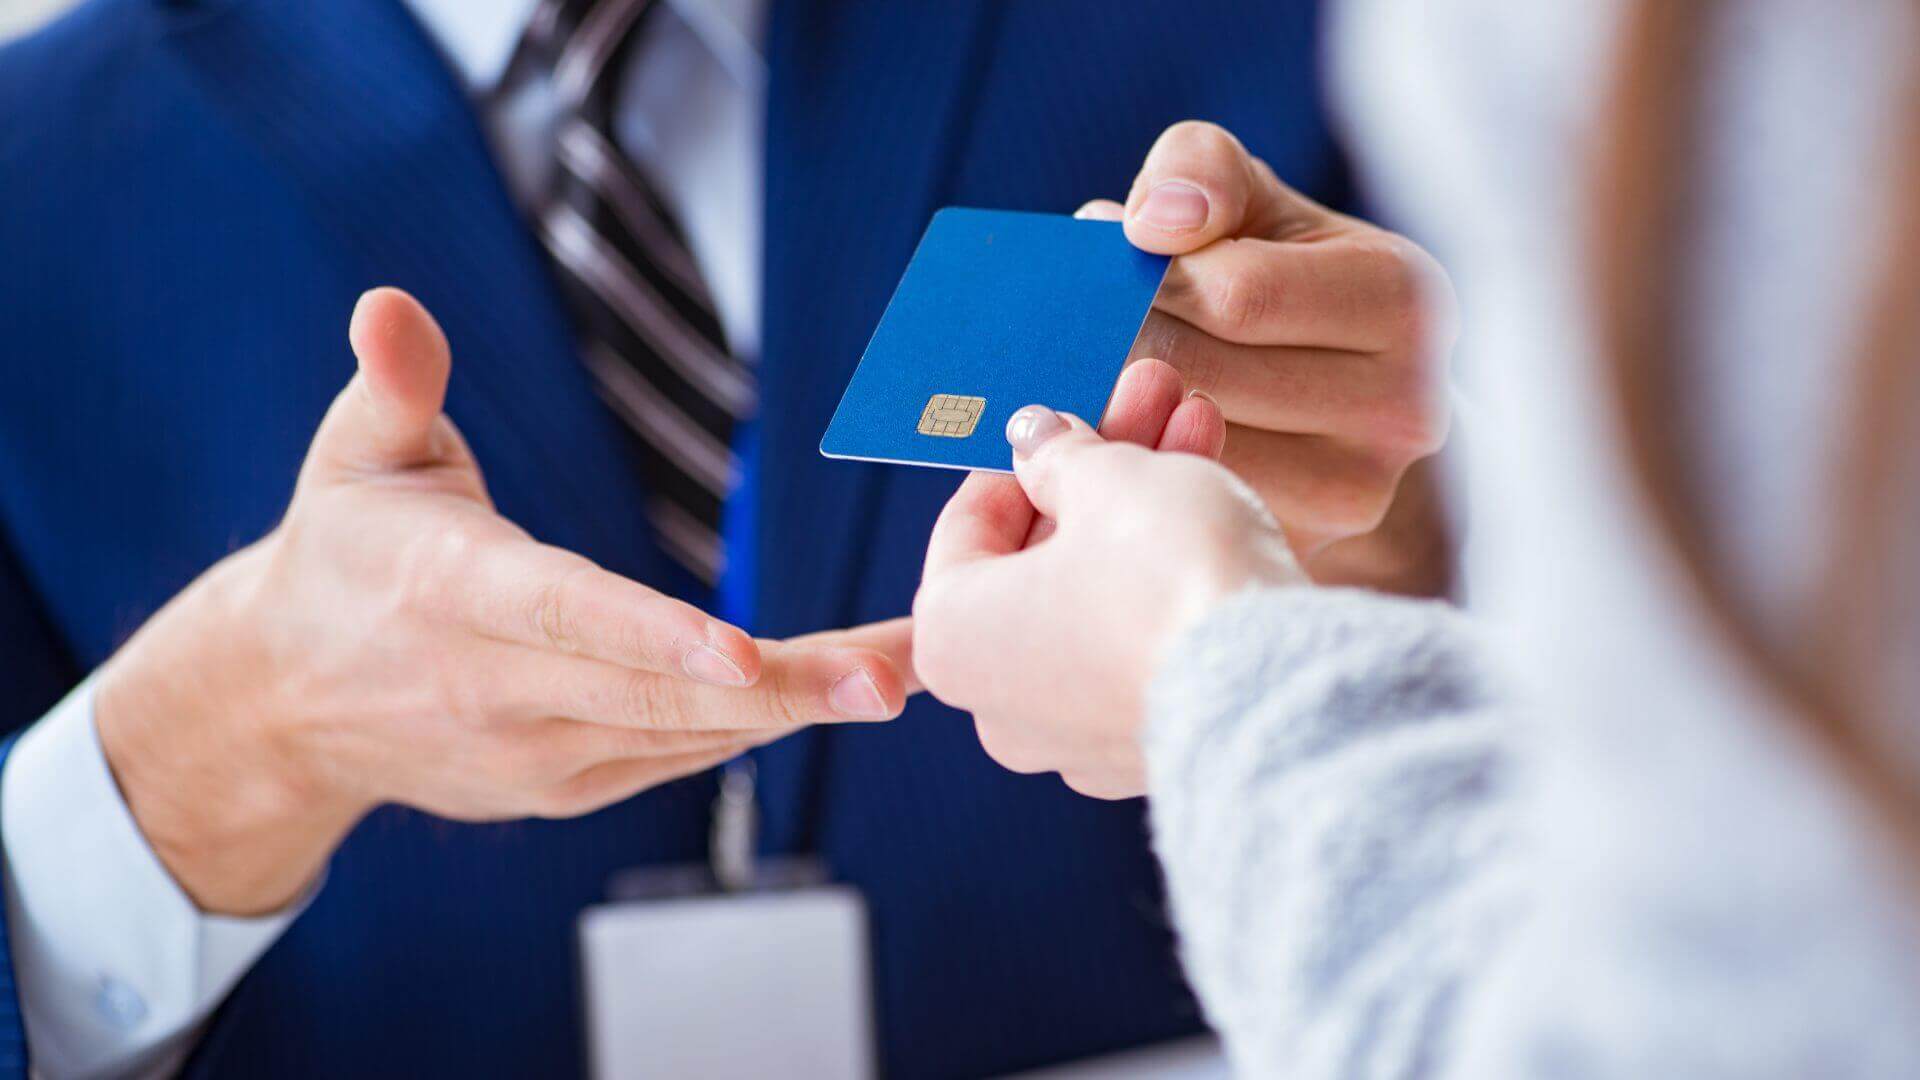 Person handing over a Amex or Chase credit card that has concierge services